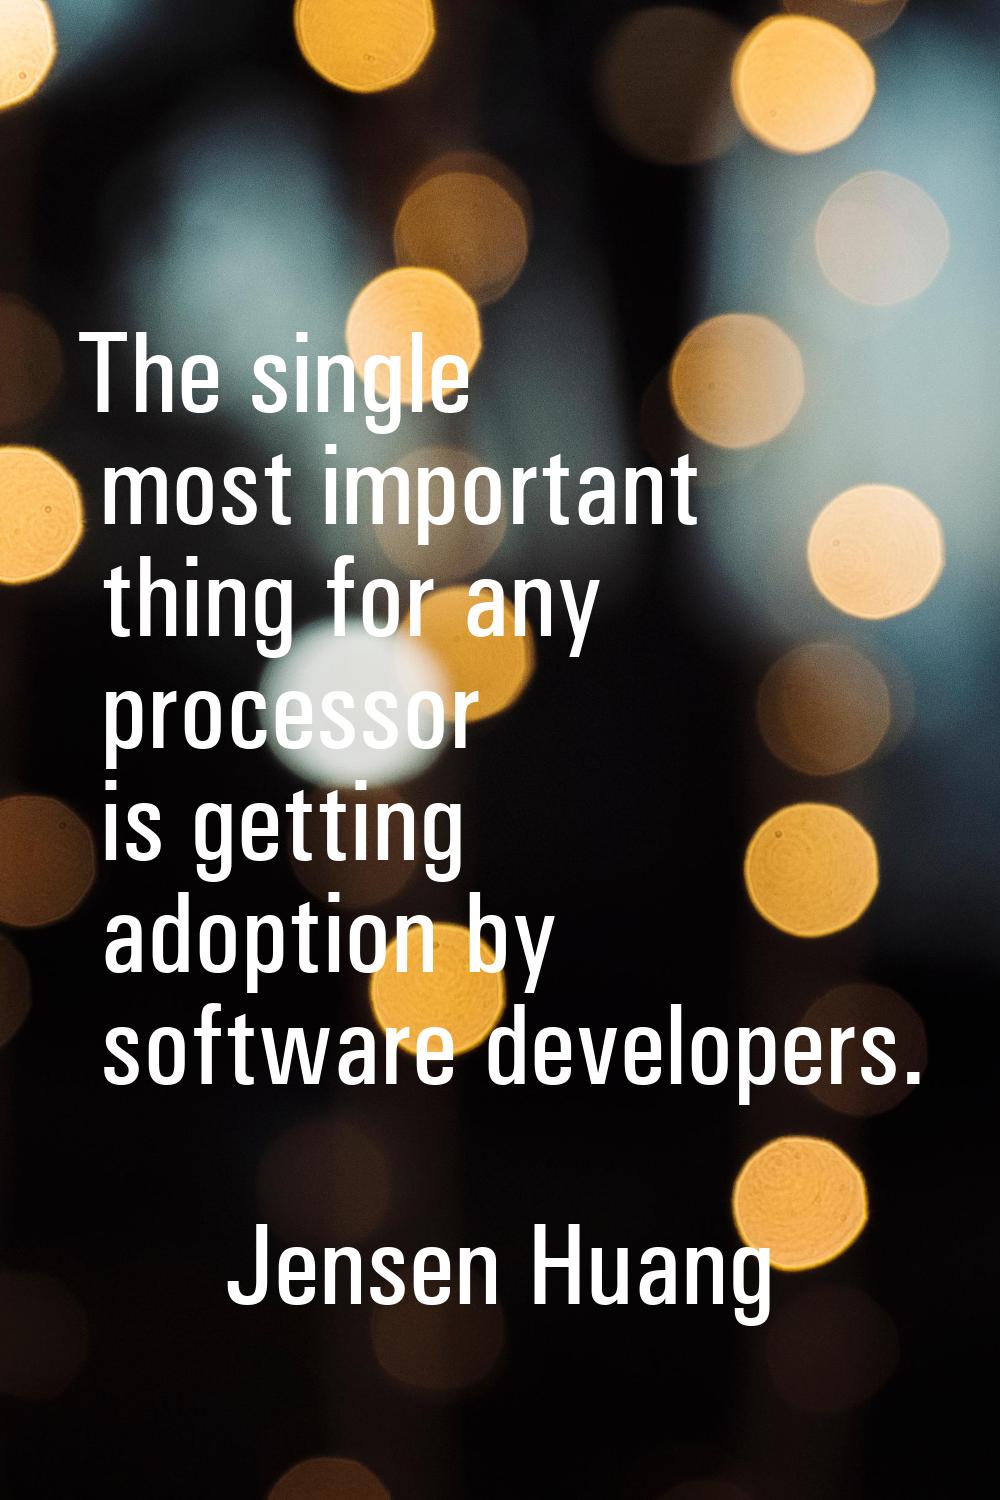 The single most important thing for any processor is getting adoption by software developers.